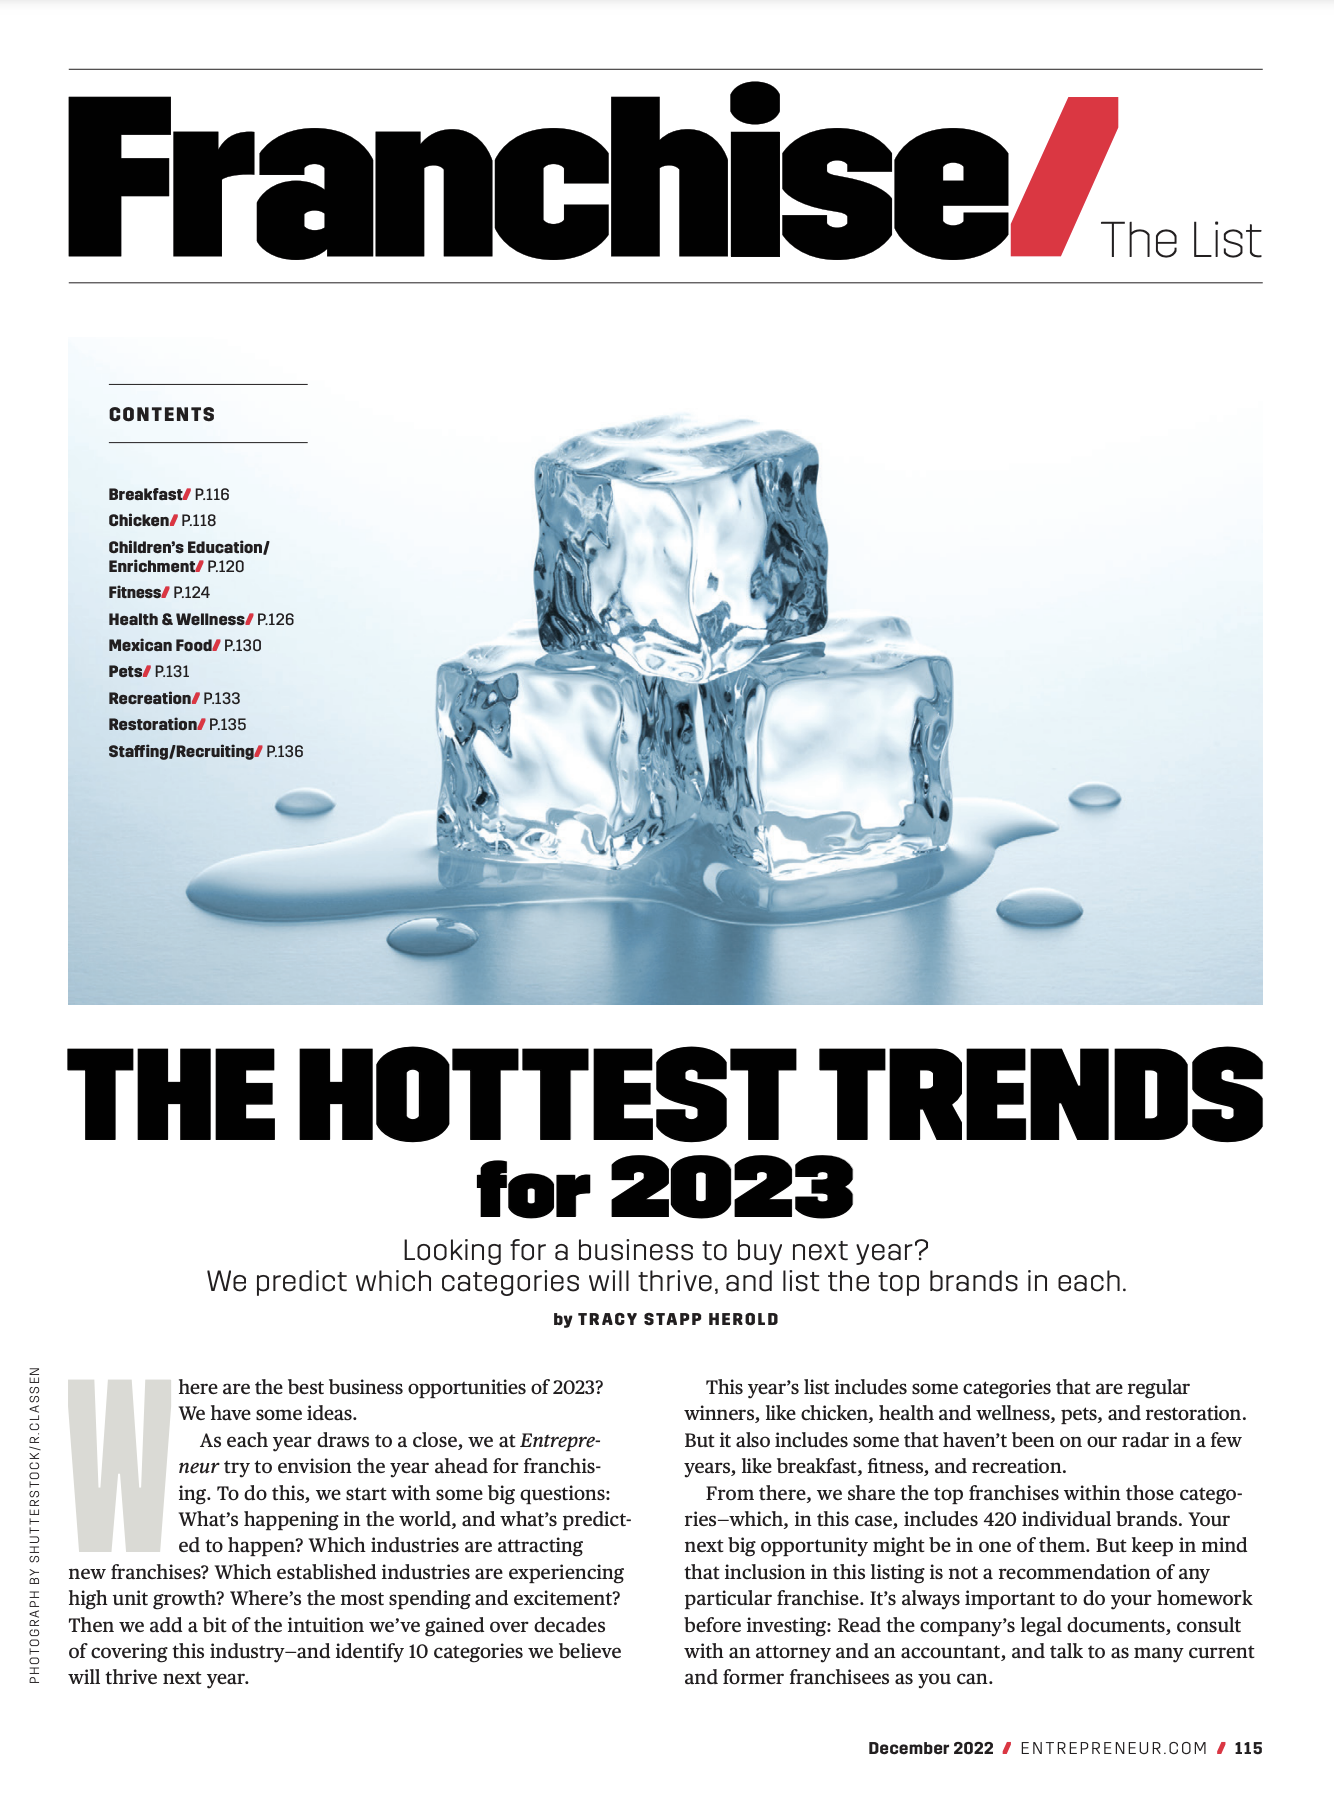 hottest trends in franchising 2023